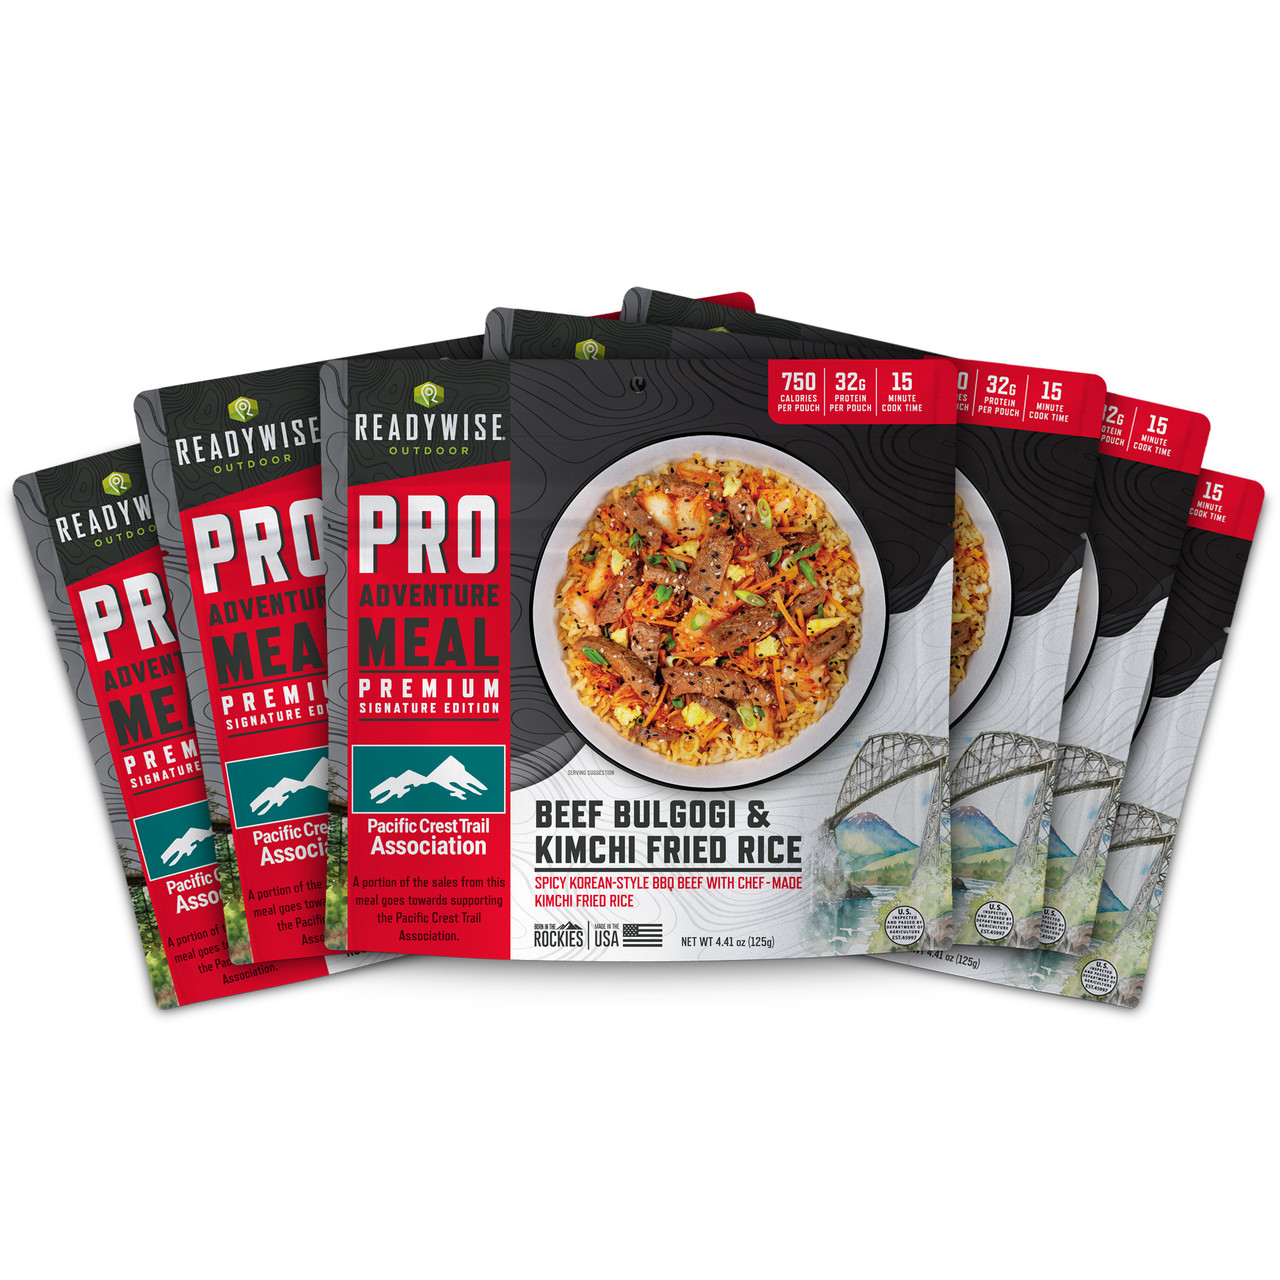 6 Pack ReadyWise Pro Adventure Meal Beef Bulgogi and Kimchi Fried Rice